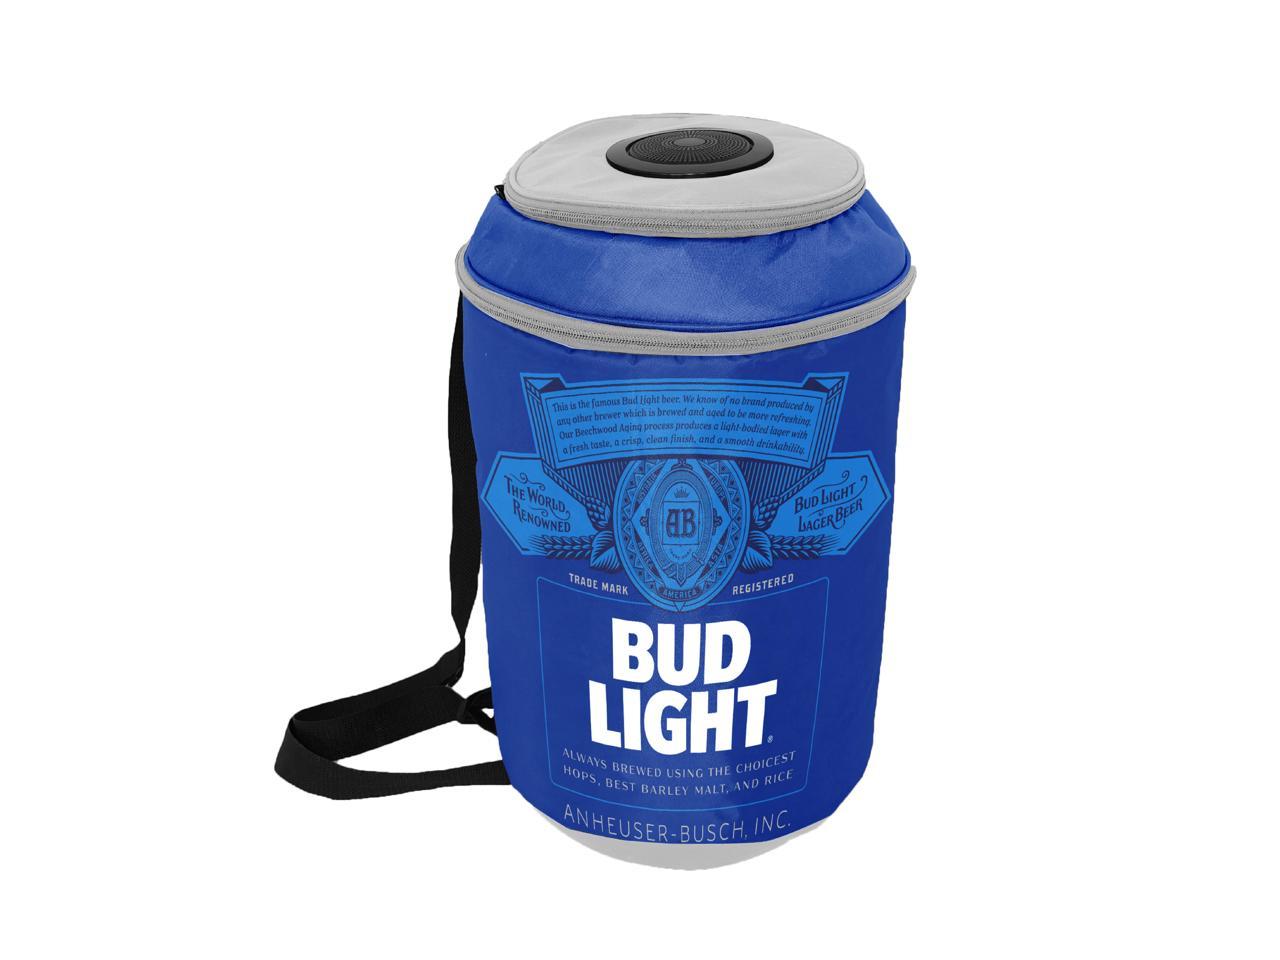 Bud Light Beer Soft Sided Insulated Cooler Pack portable Holds 24 Cans 